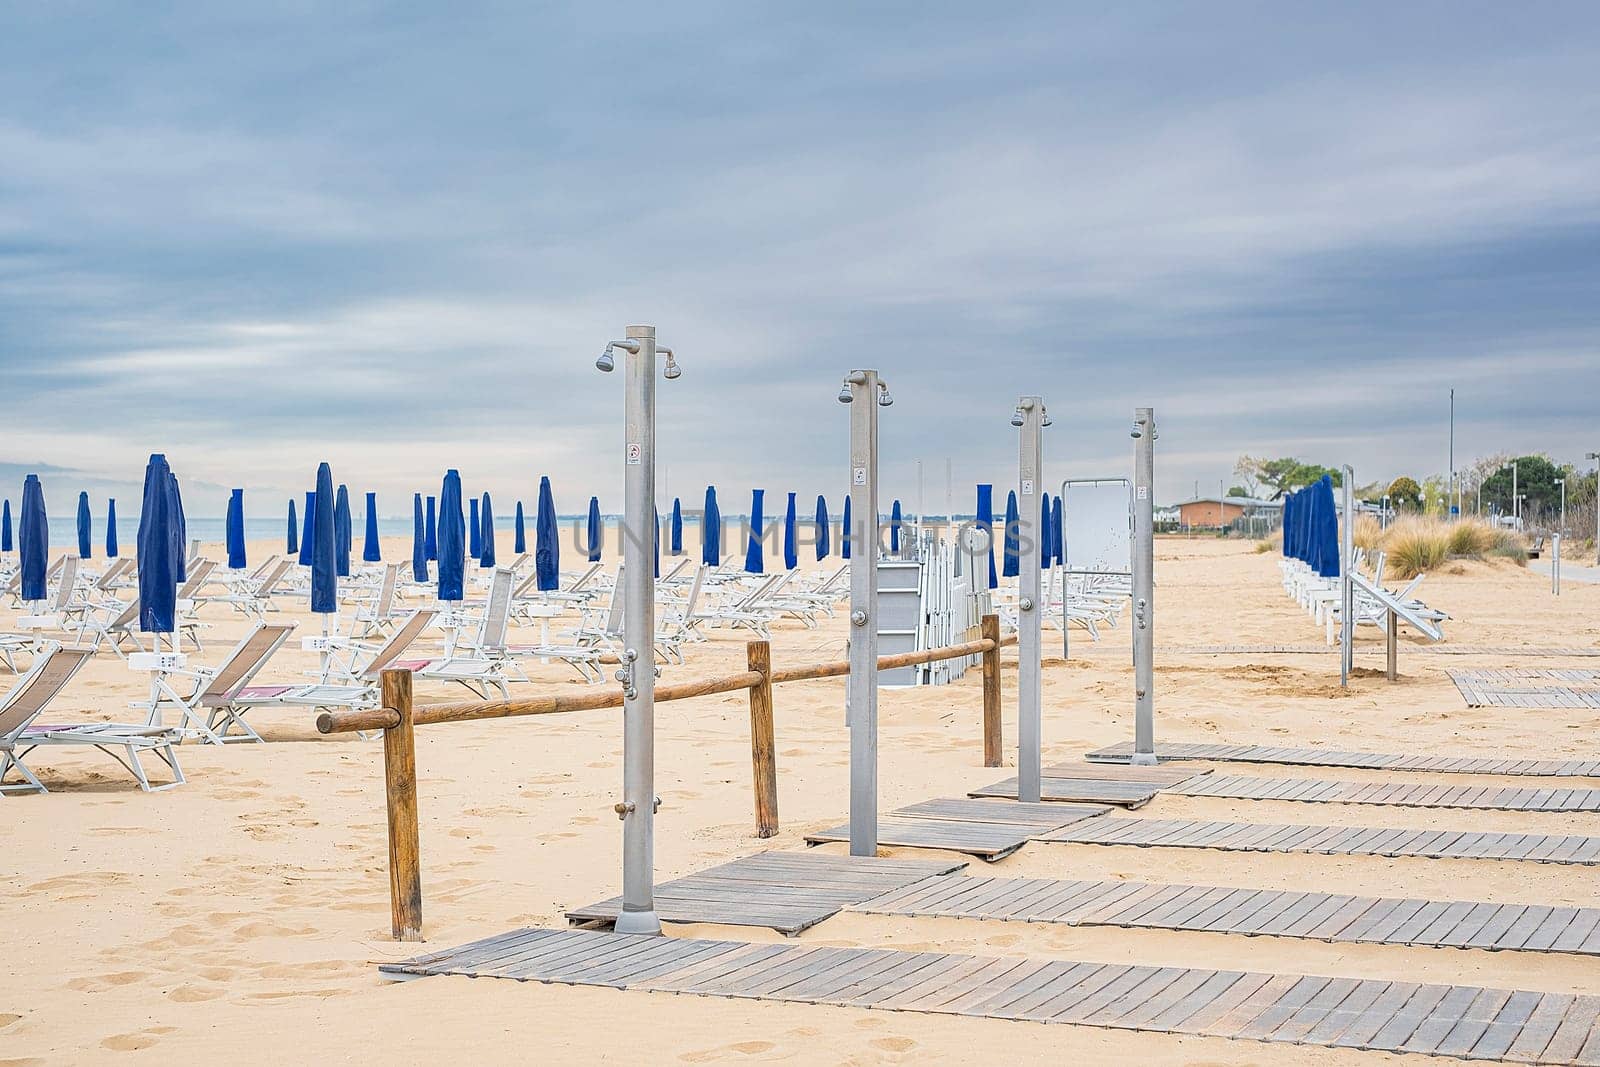 Outdoor public showers on the beach in Italy, summer holiday concept by Annavish